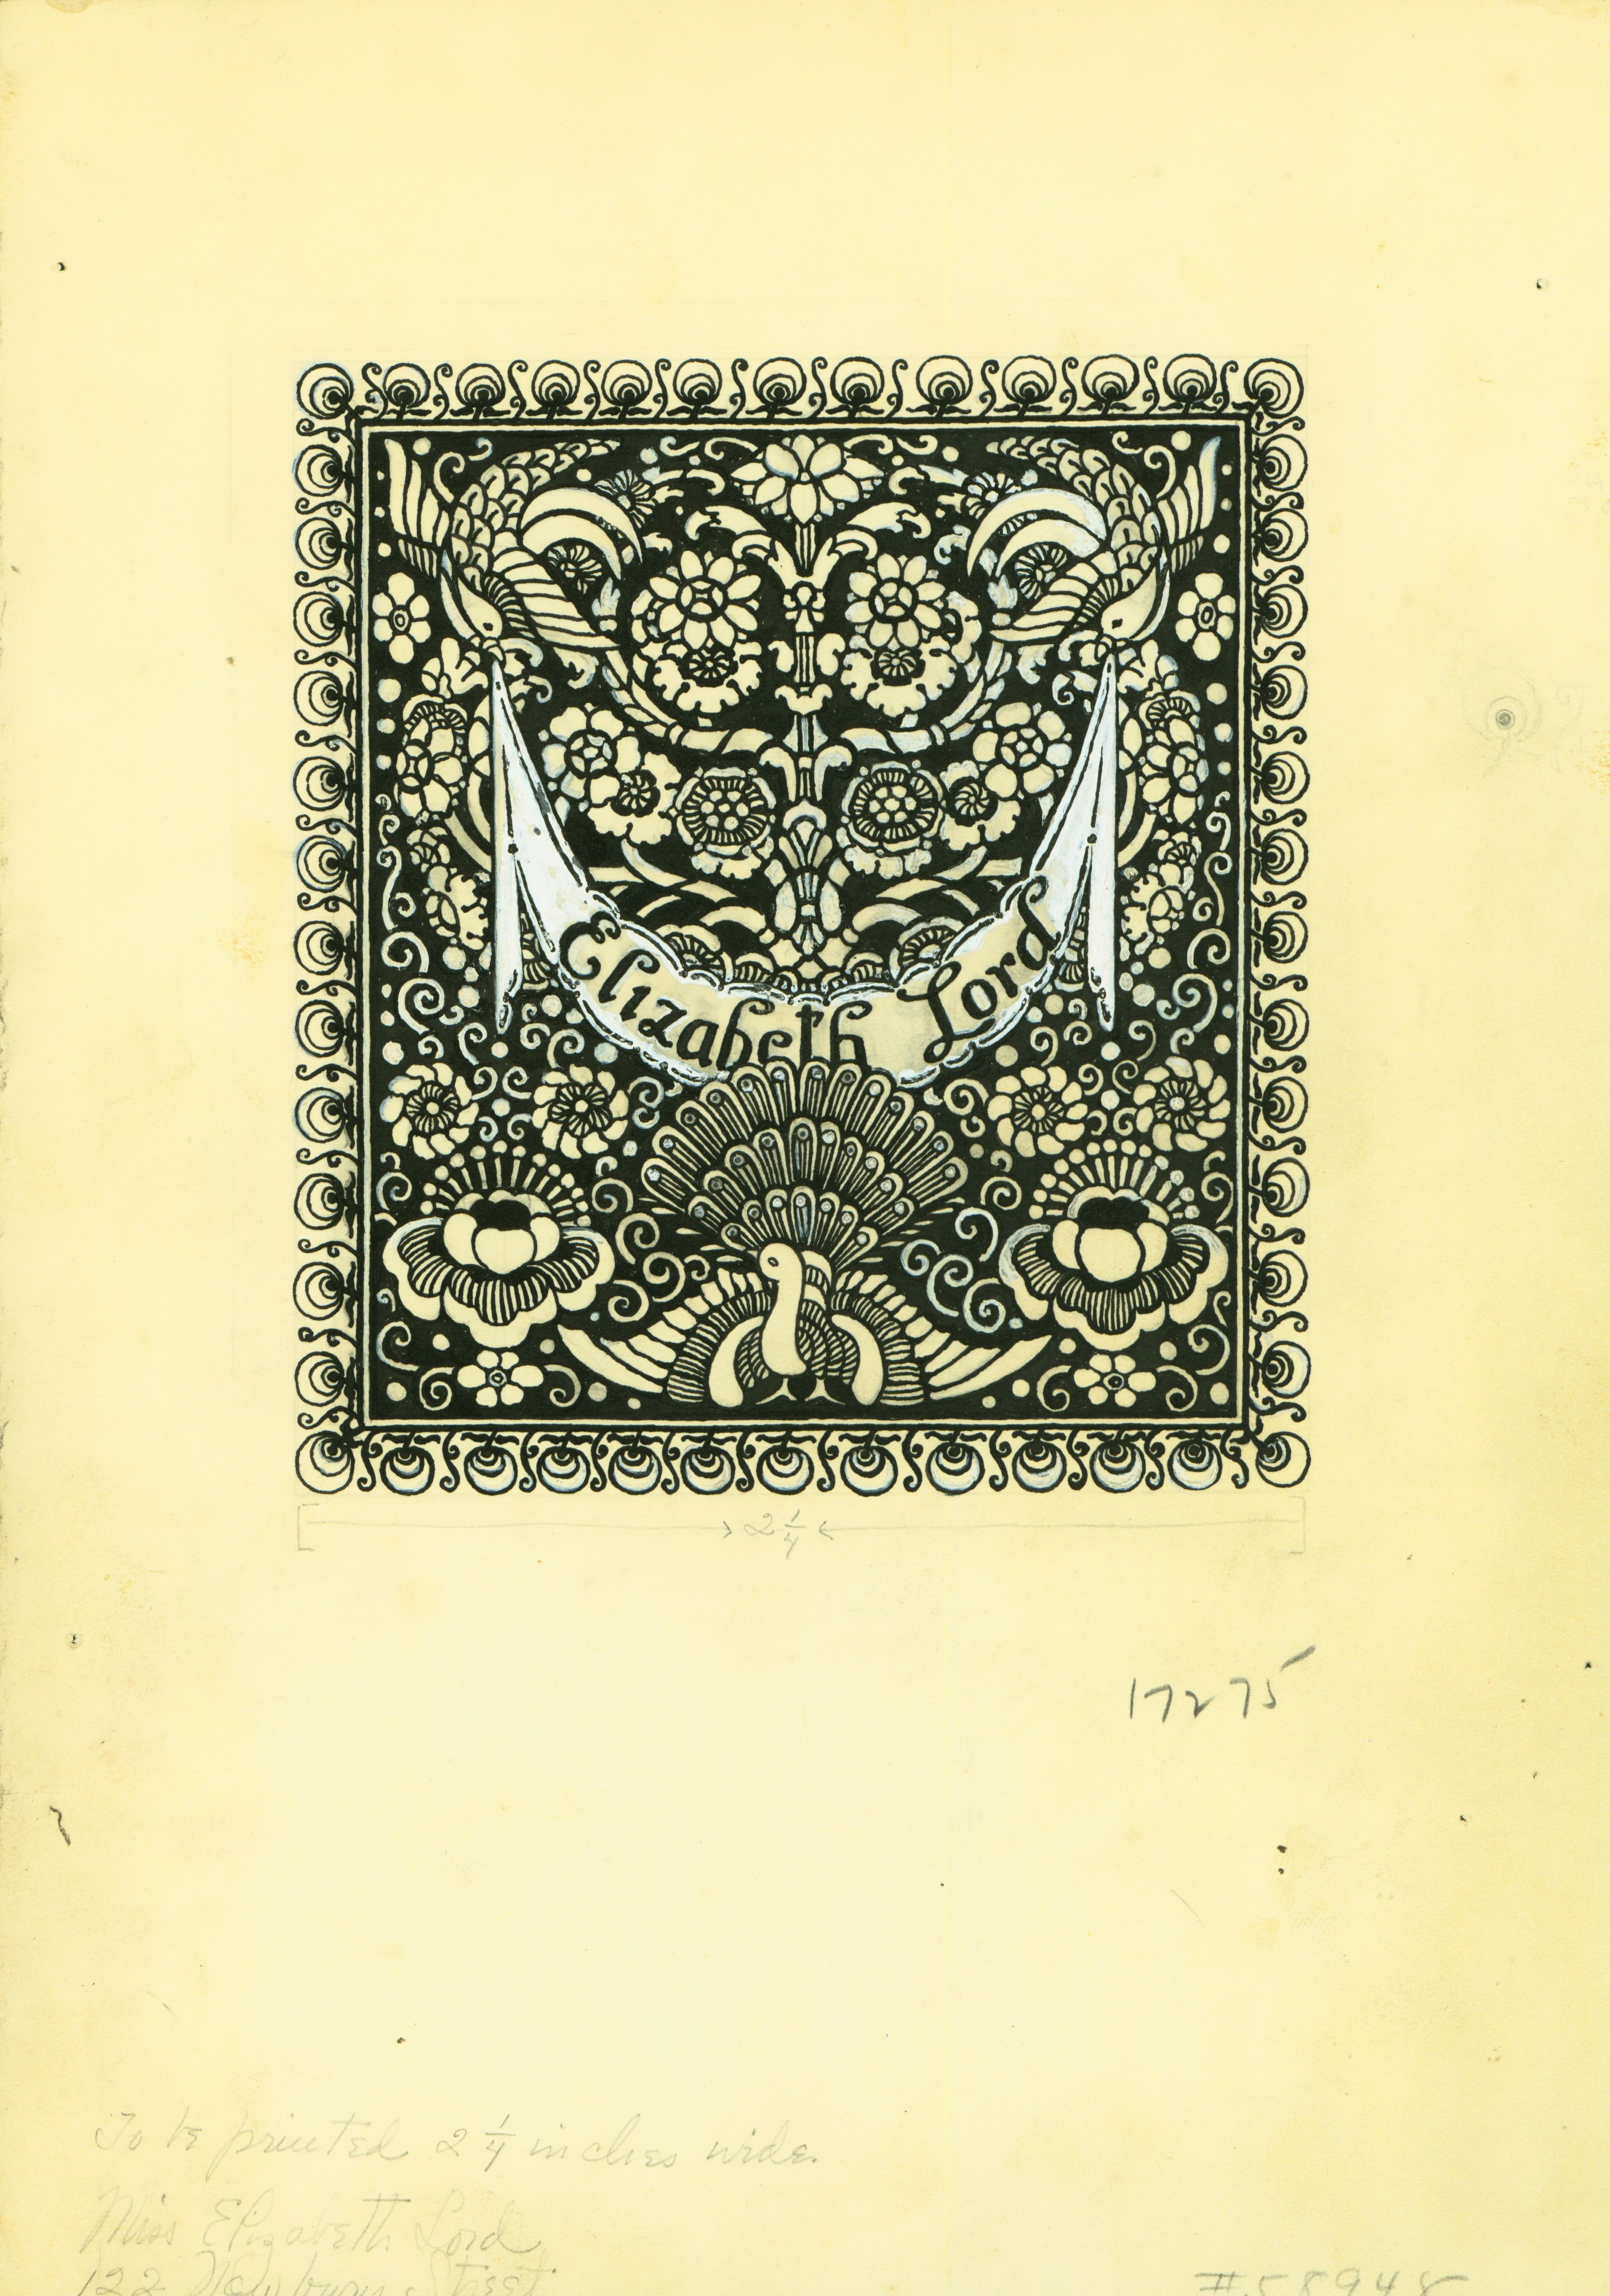 Scan of Elizabeth Lord's bookplate, hand-drawn